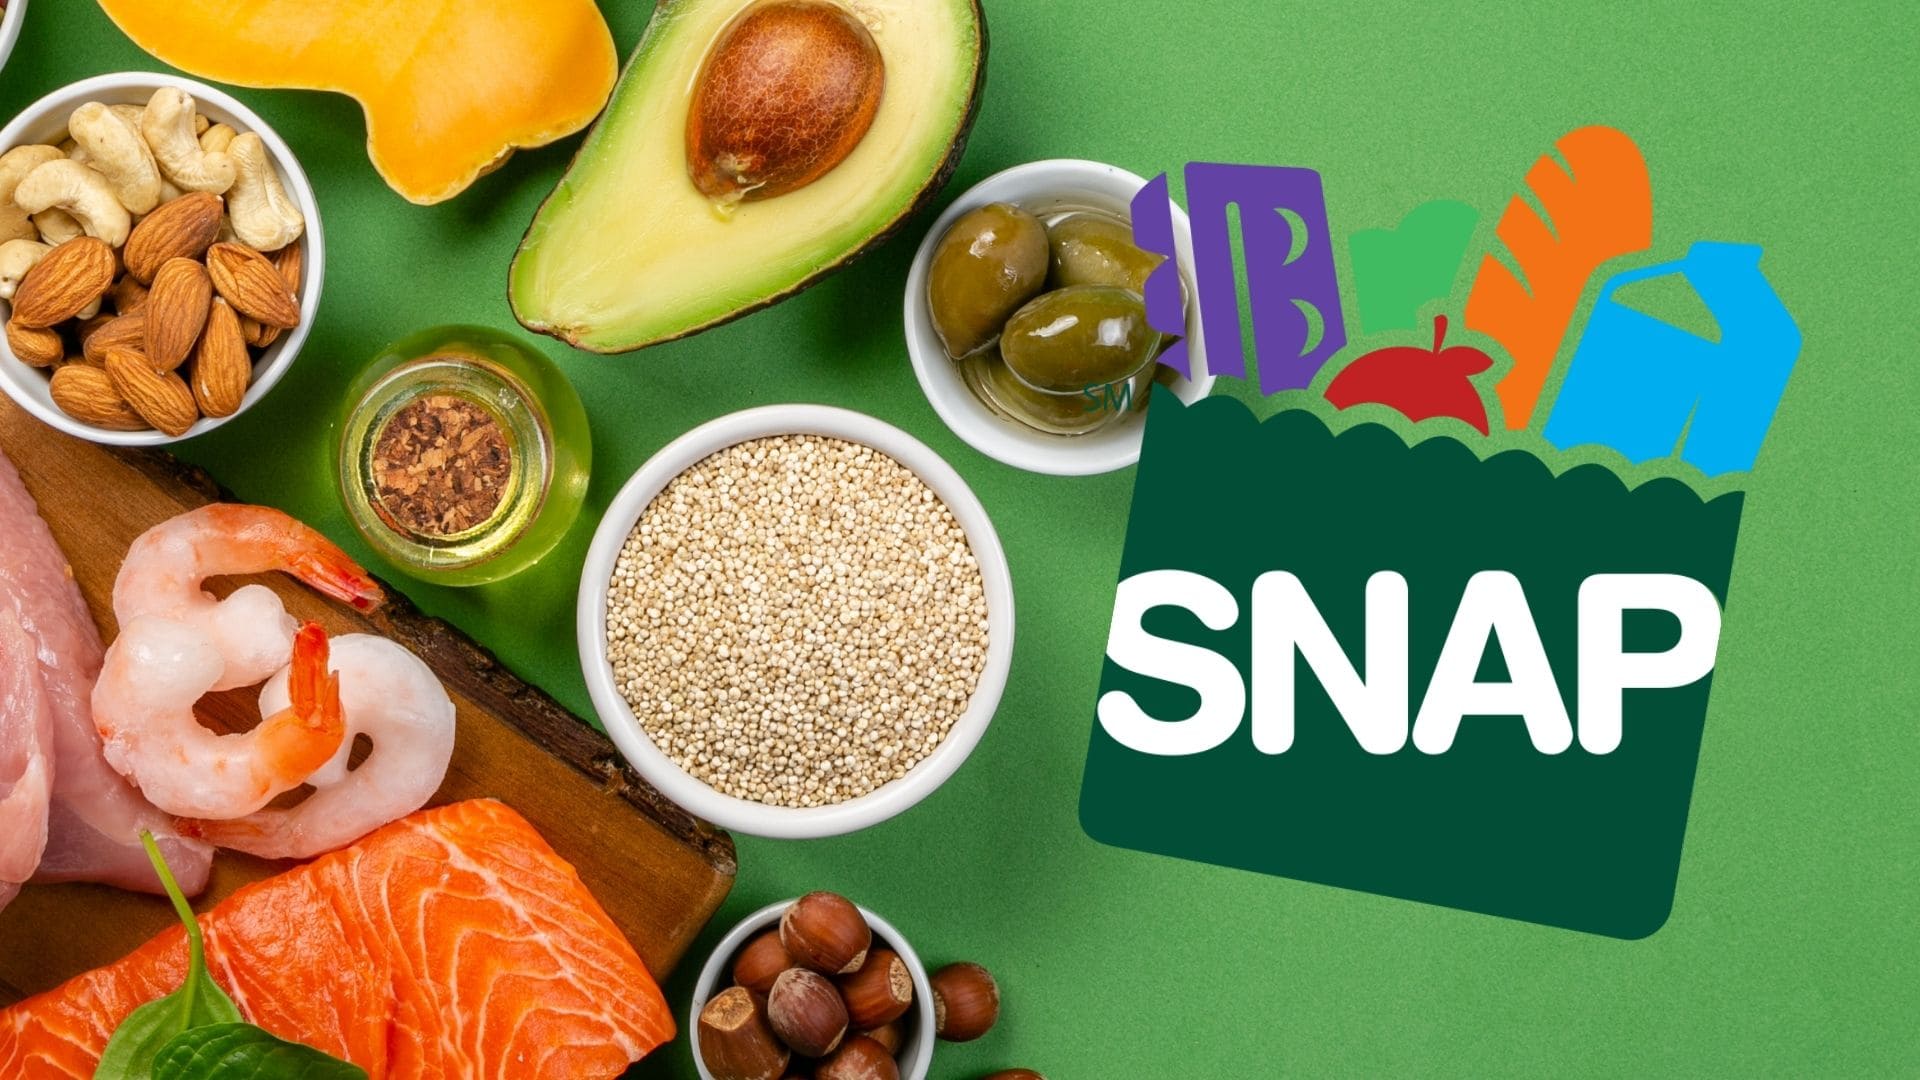 SNAP Food Stamps will send money today and during this week to americans